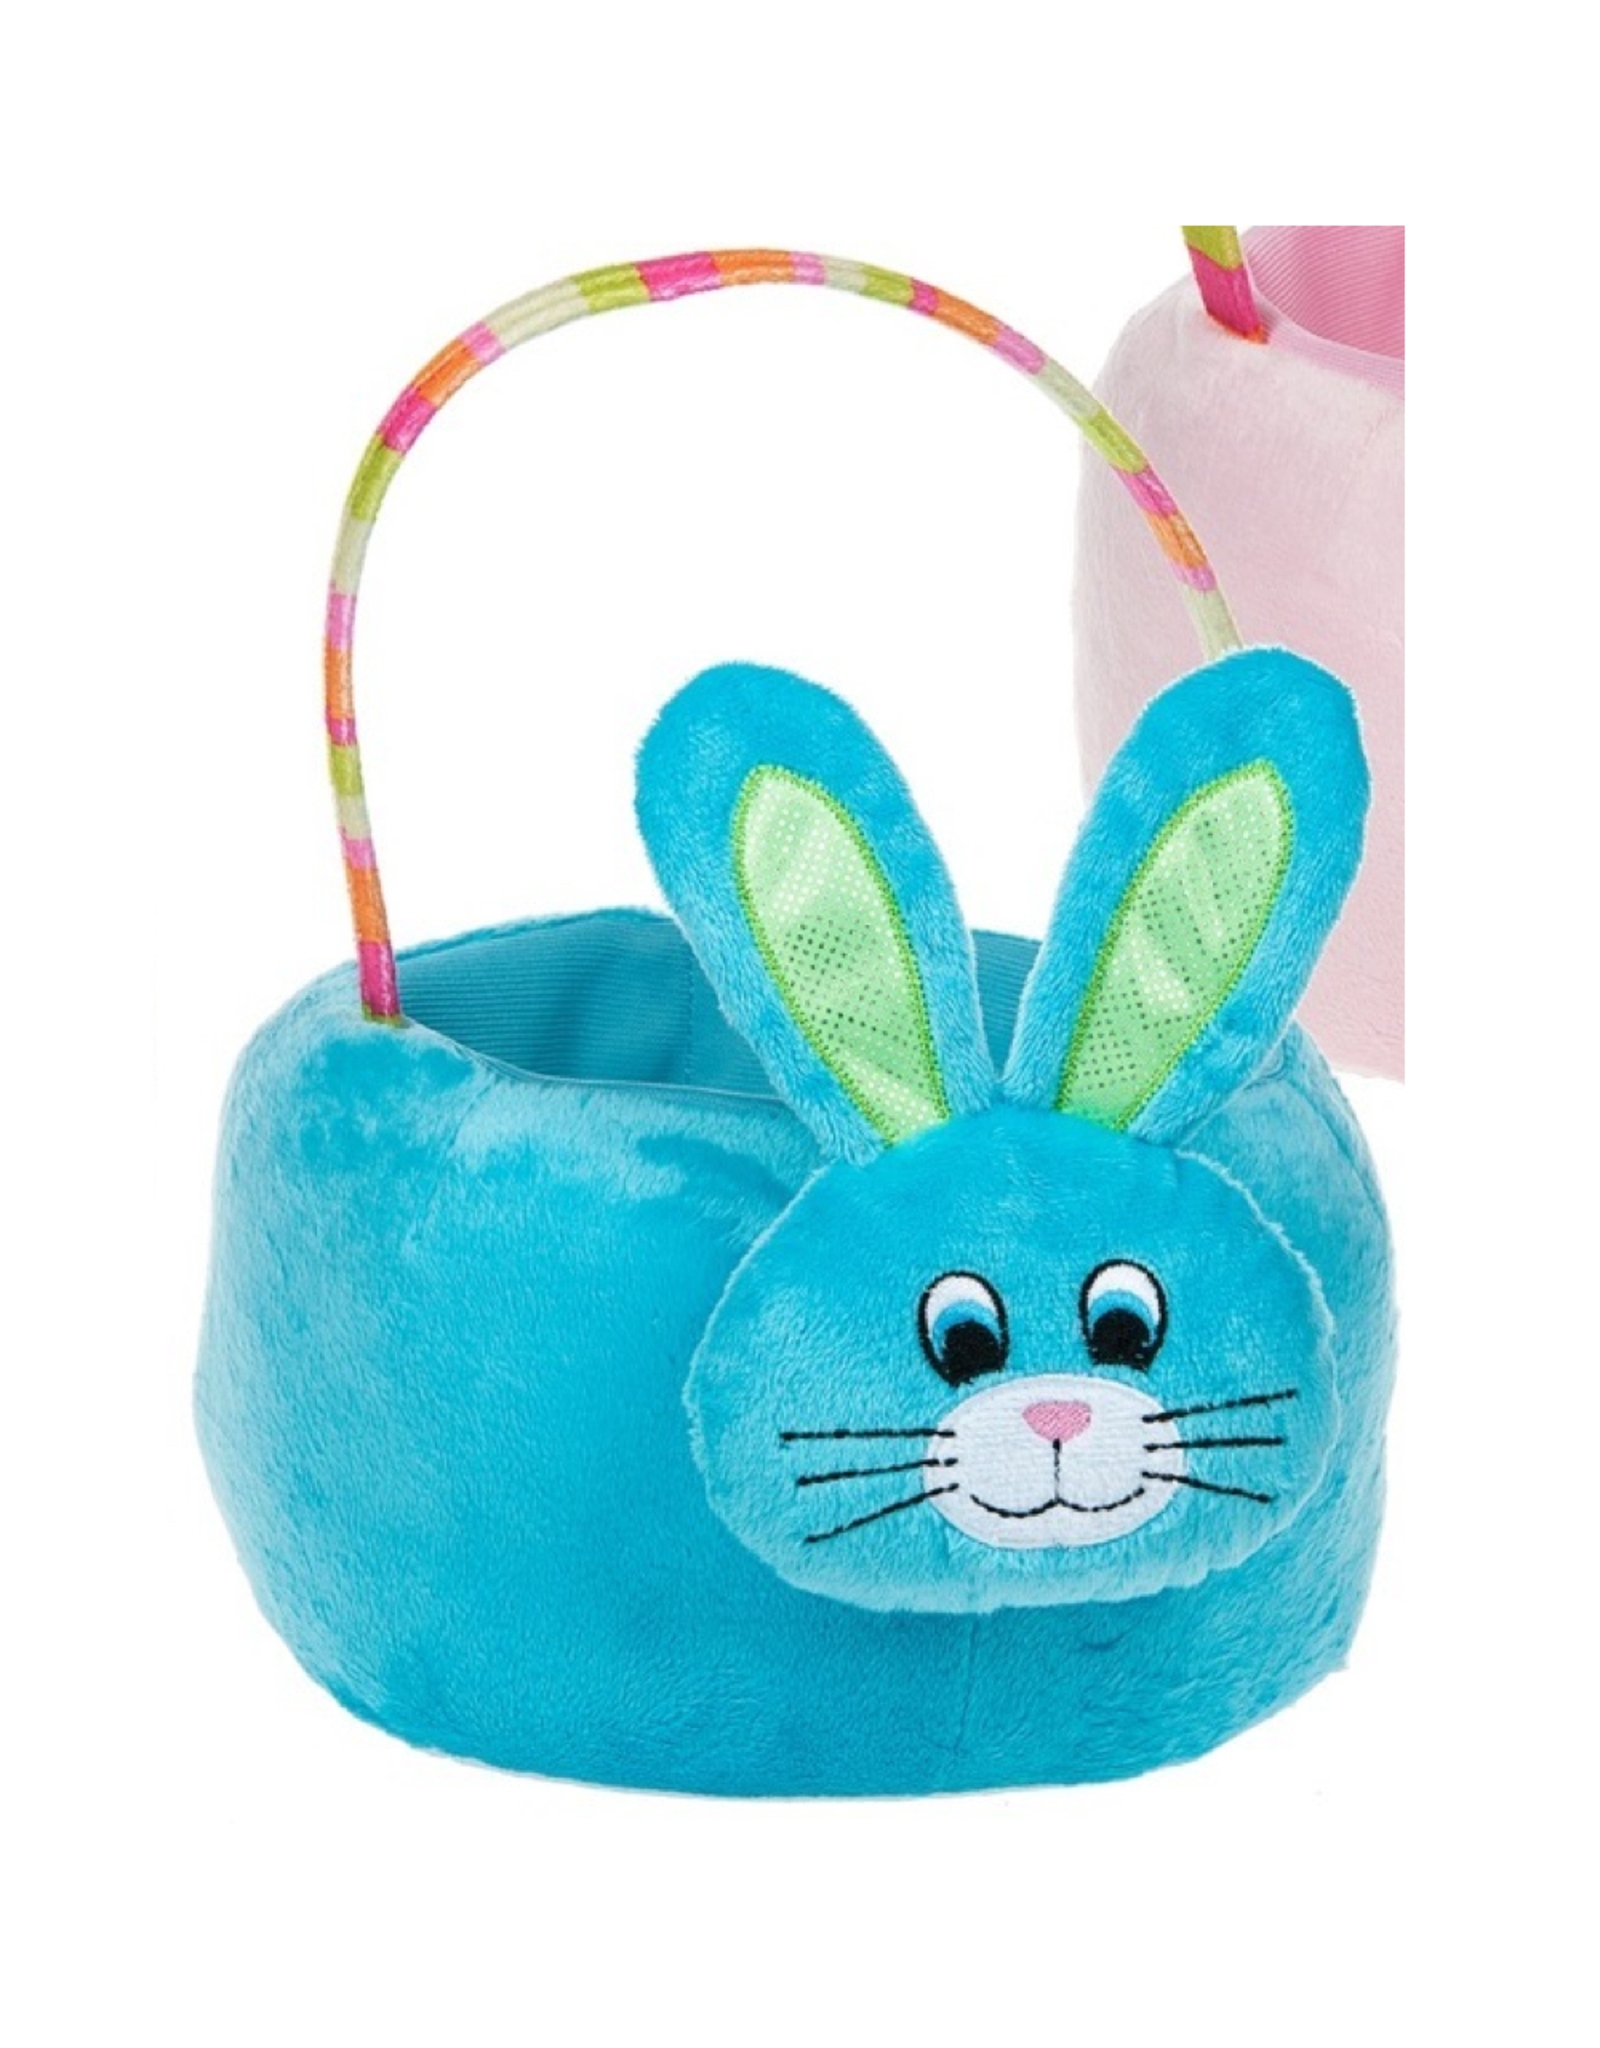 Midwest-CBK Plush Easter Bunny Basket with Handle 8x10x5H inches - Blue